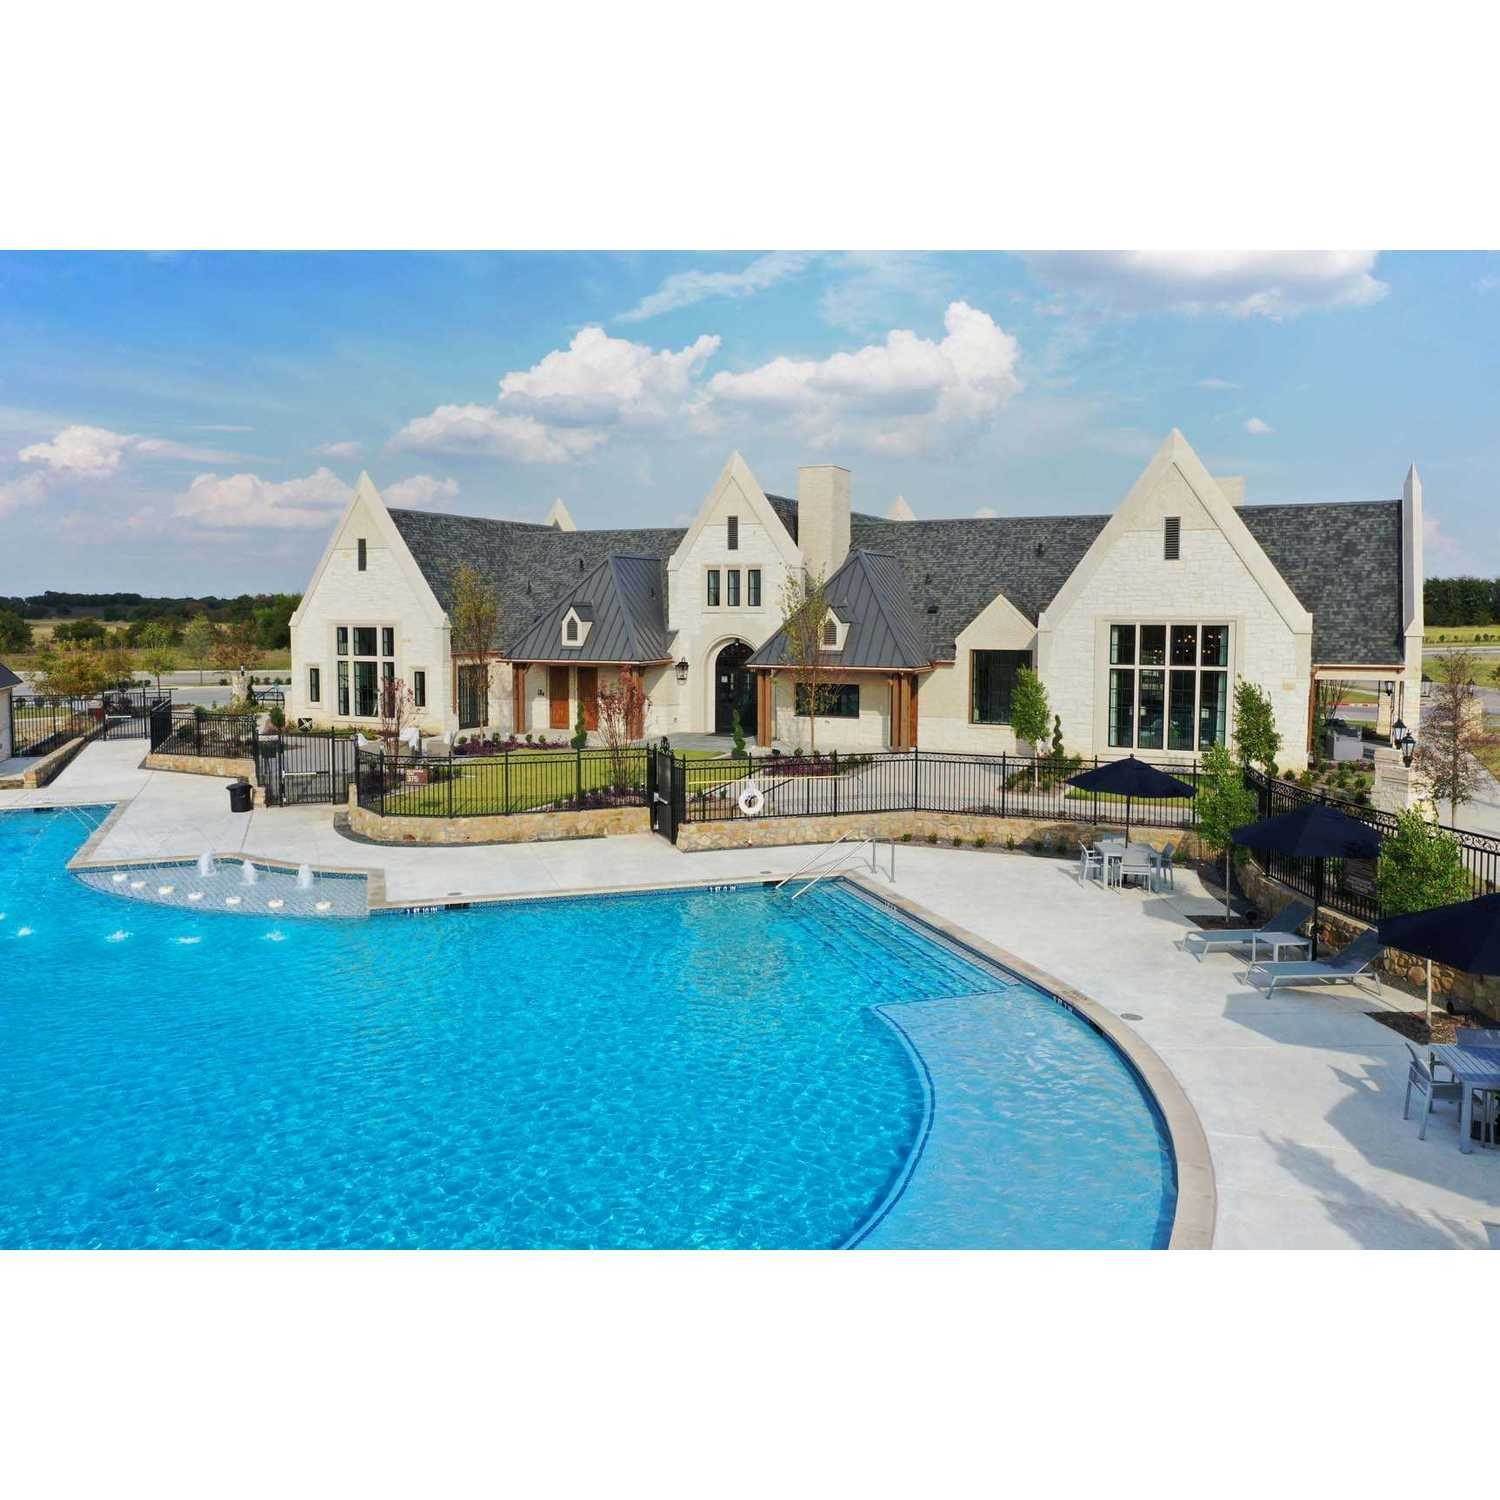 34. Cambridge Crossing 40ft. lots xây dựng tại 2237 Pinner Court, Frisco, TX 75035